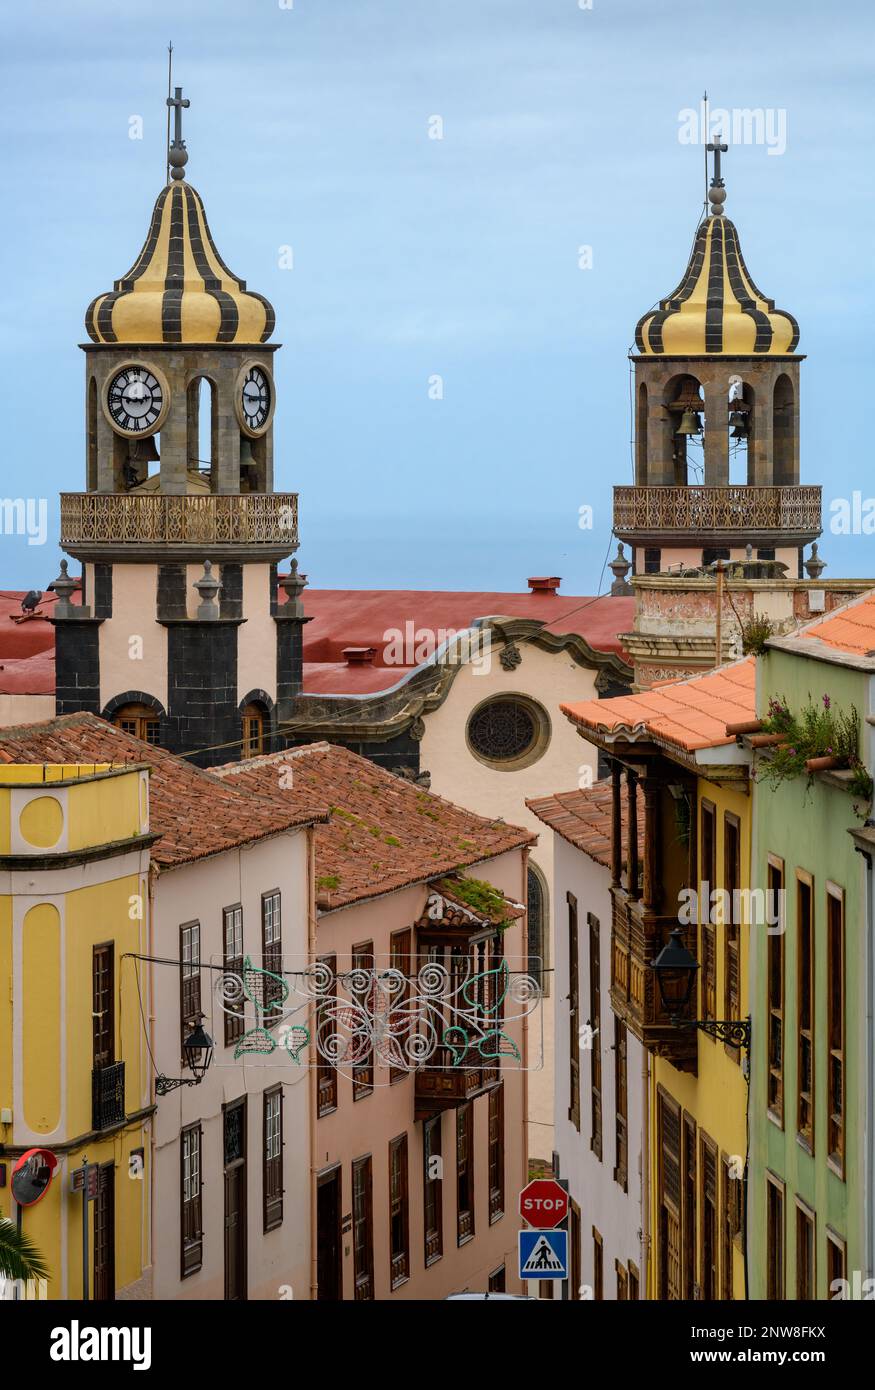 The ornate onion-shaped cupolas of Iglesia de La Concepción rise over the terracotta roofs and brightly coloured buildings of La Orotava in Tenerife. Stock Photo